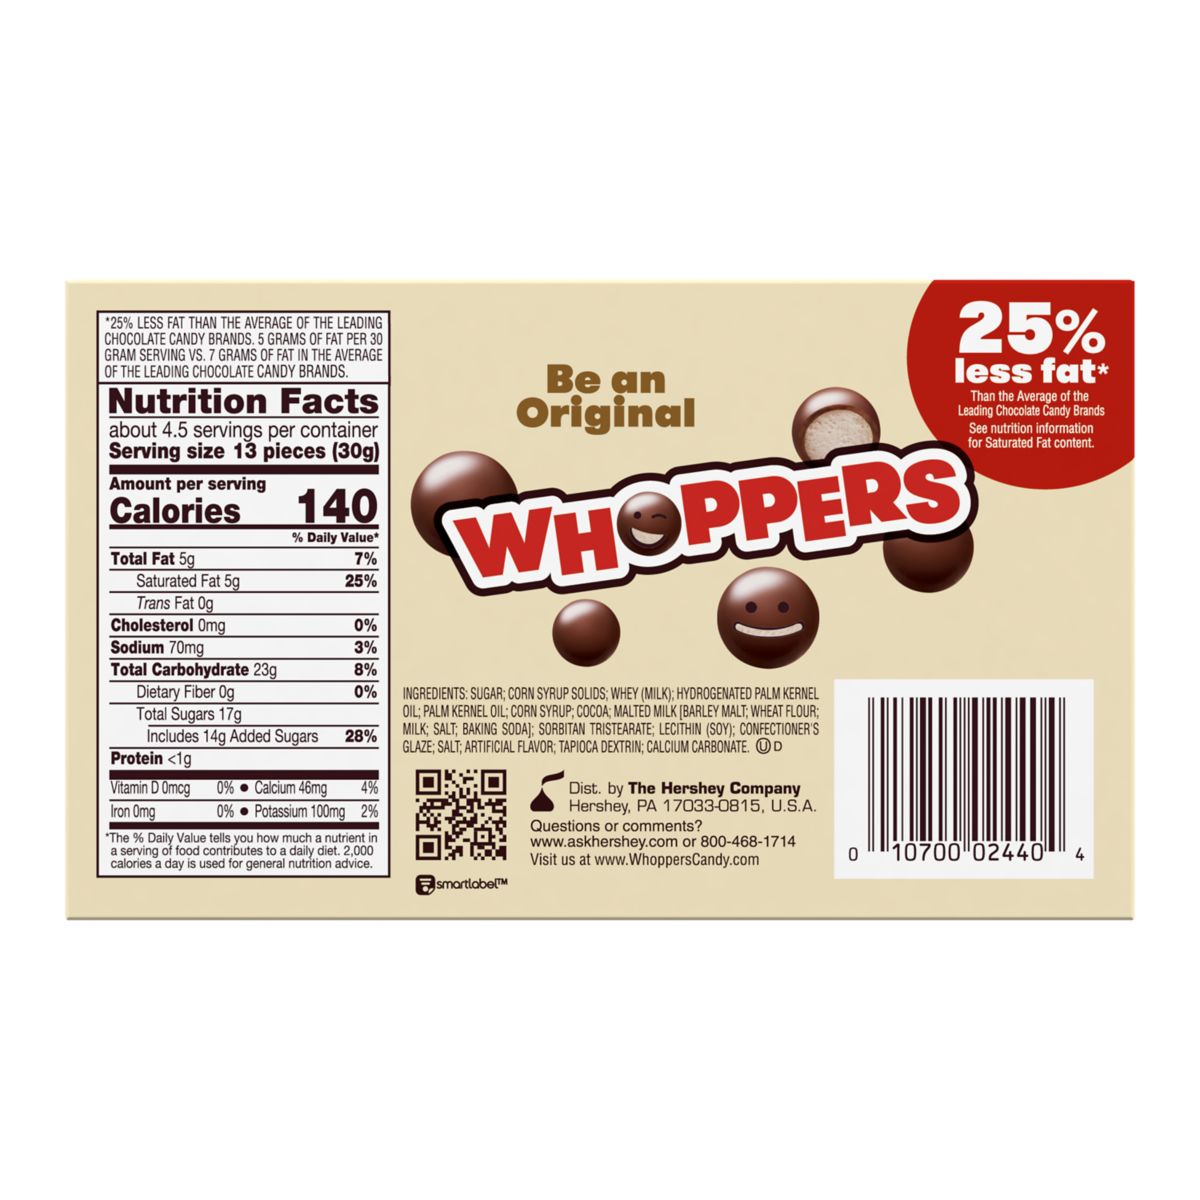 Whoppers Malted Milk Balls - 5-oz. Theater Box